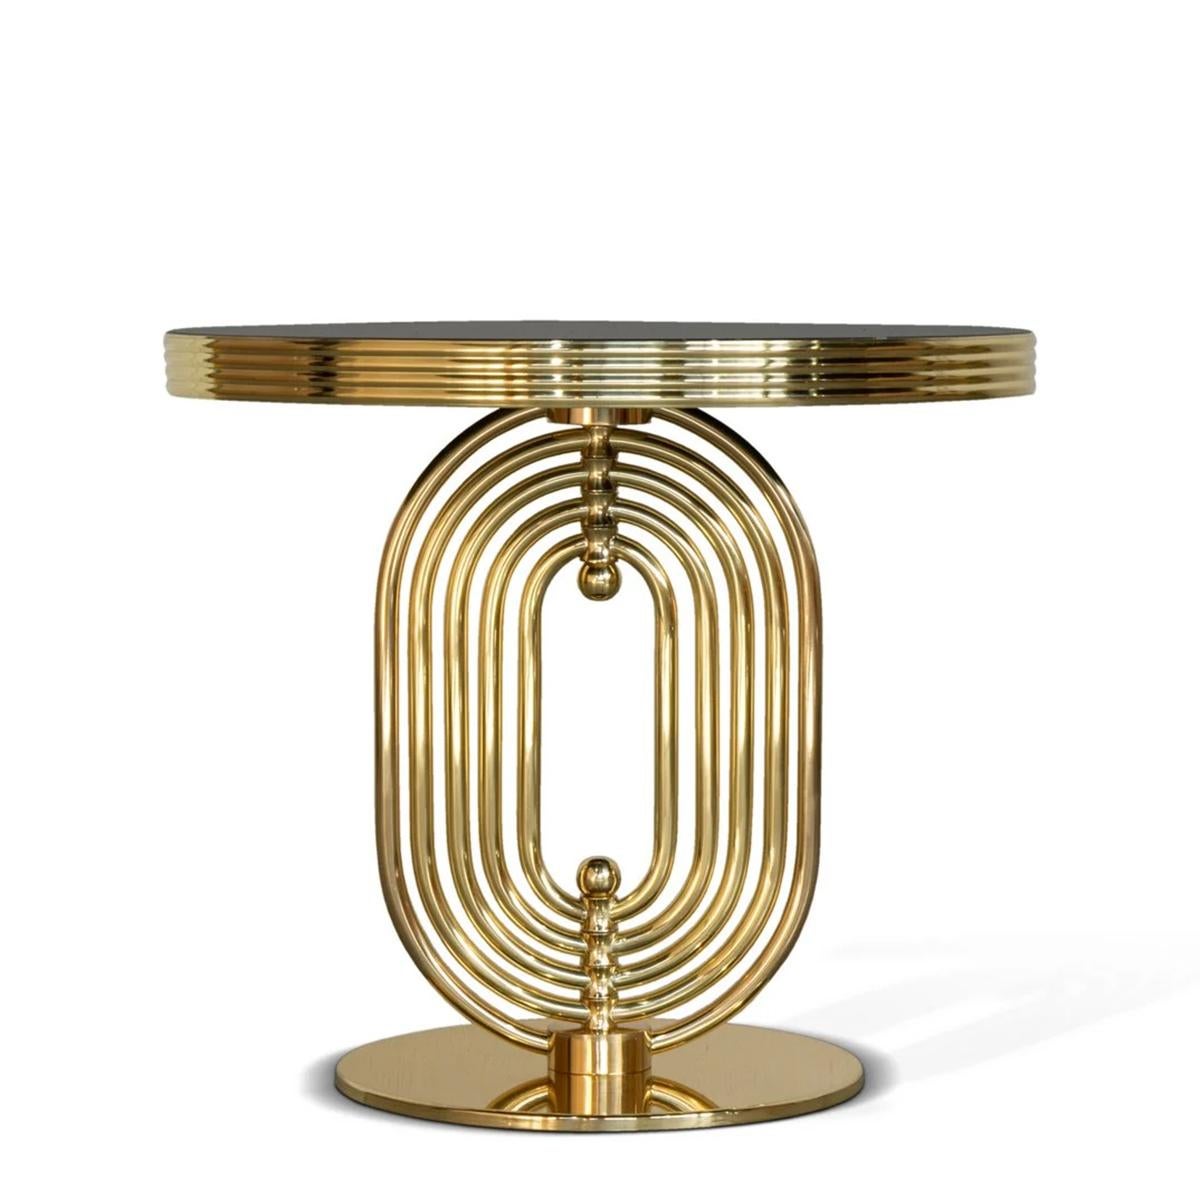 Round Table Pema with structure in solid brass in polished 
finish, with rotating elements on the pole of the base. With
polished black marble round top.